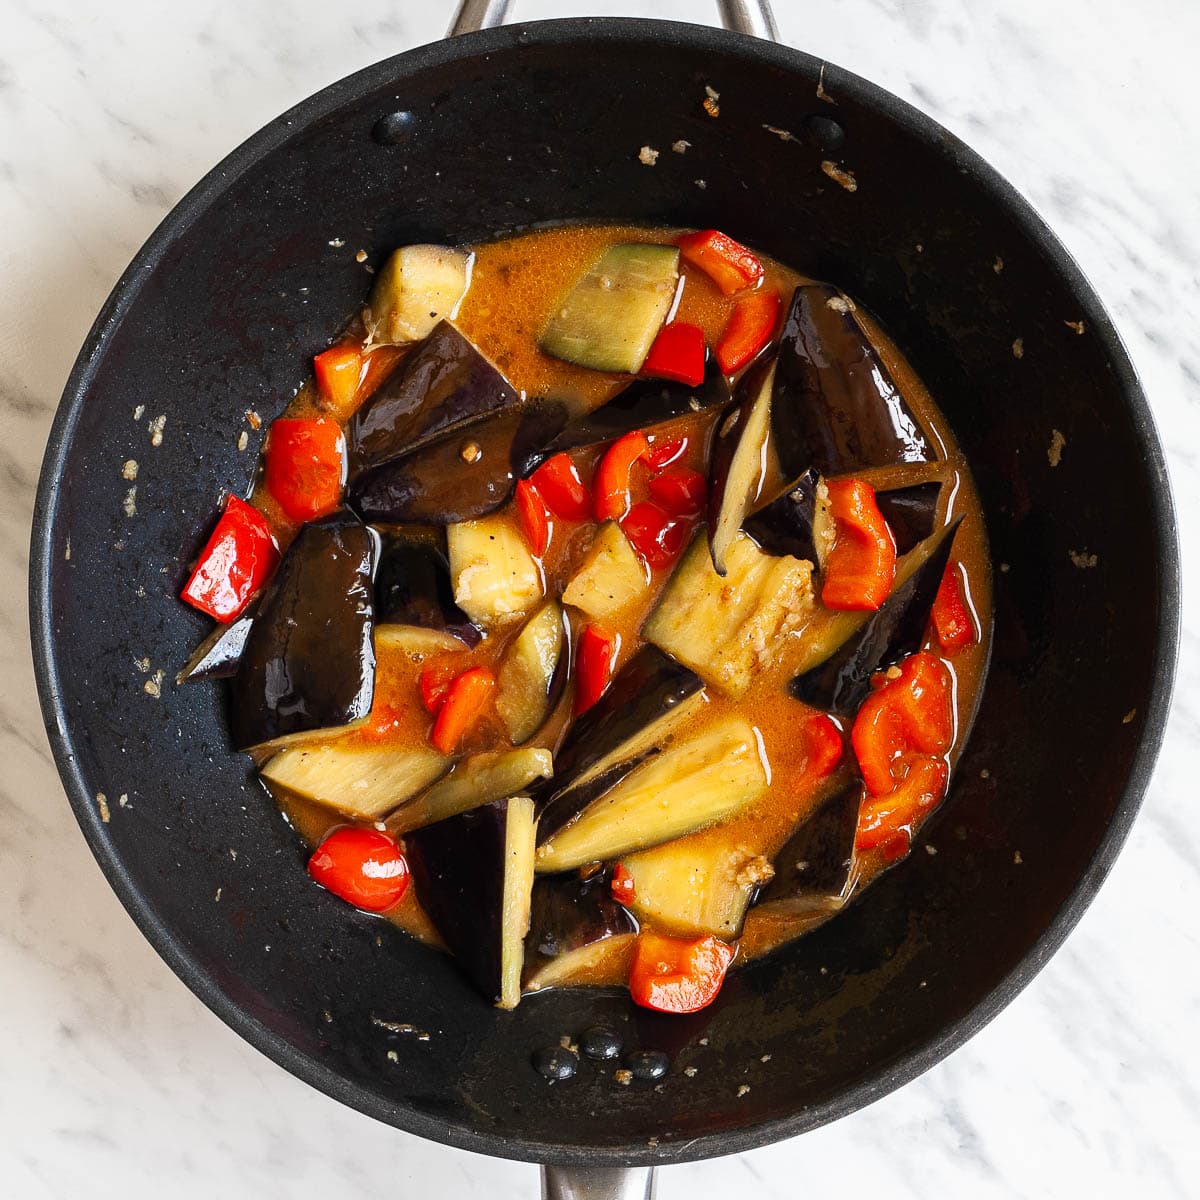 Eggplant slices and red pepper chunks in a wok are swimming in a brown sauce